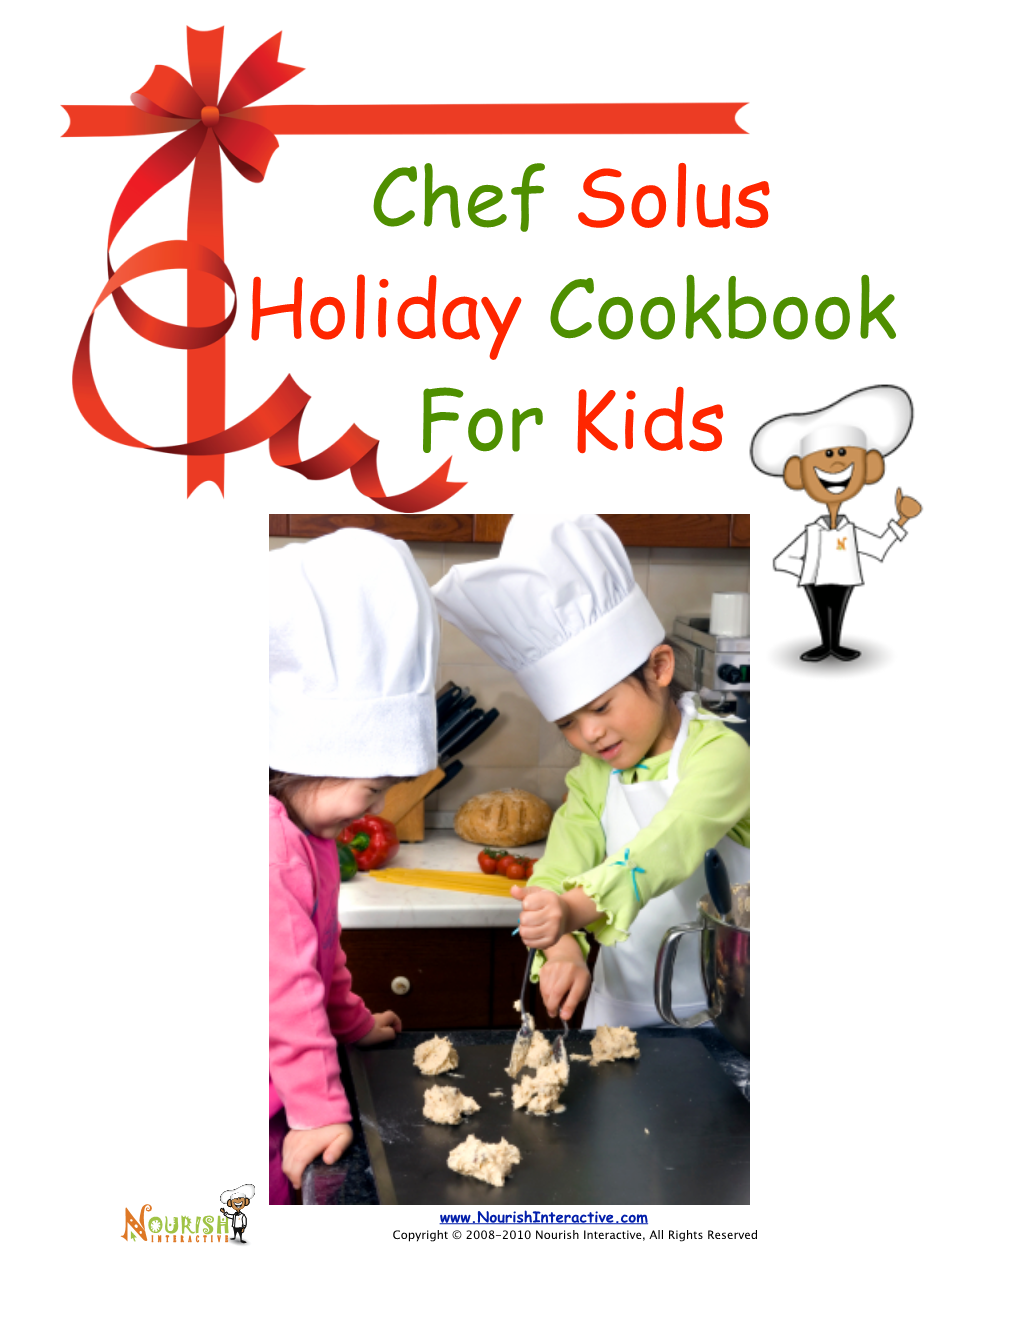 Chef Solus Holiday Cookbook for Kids